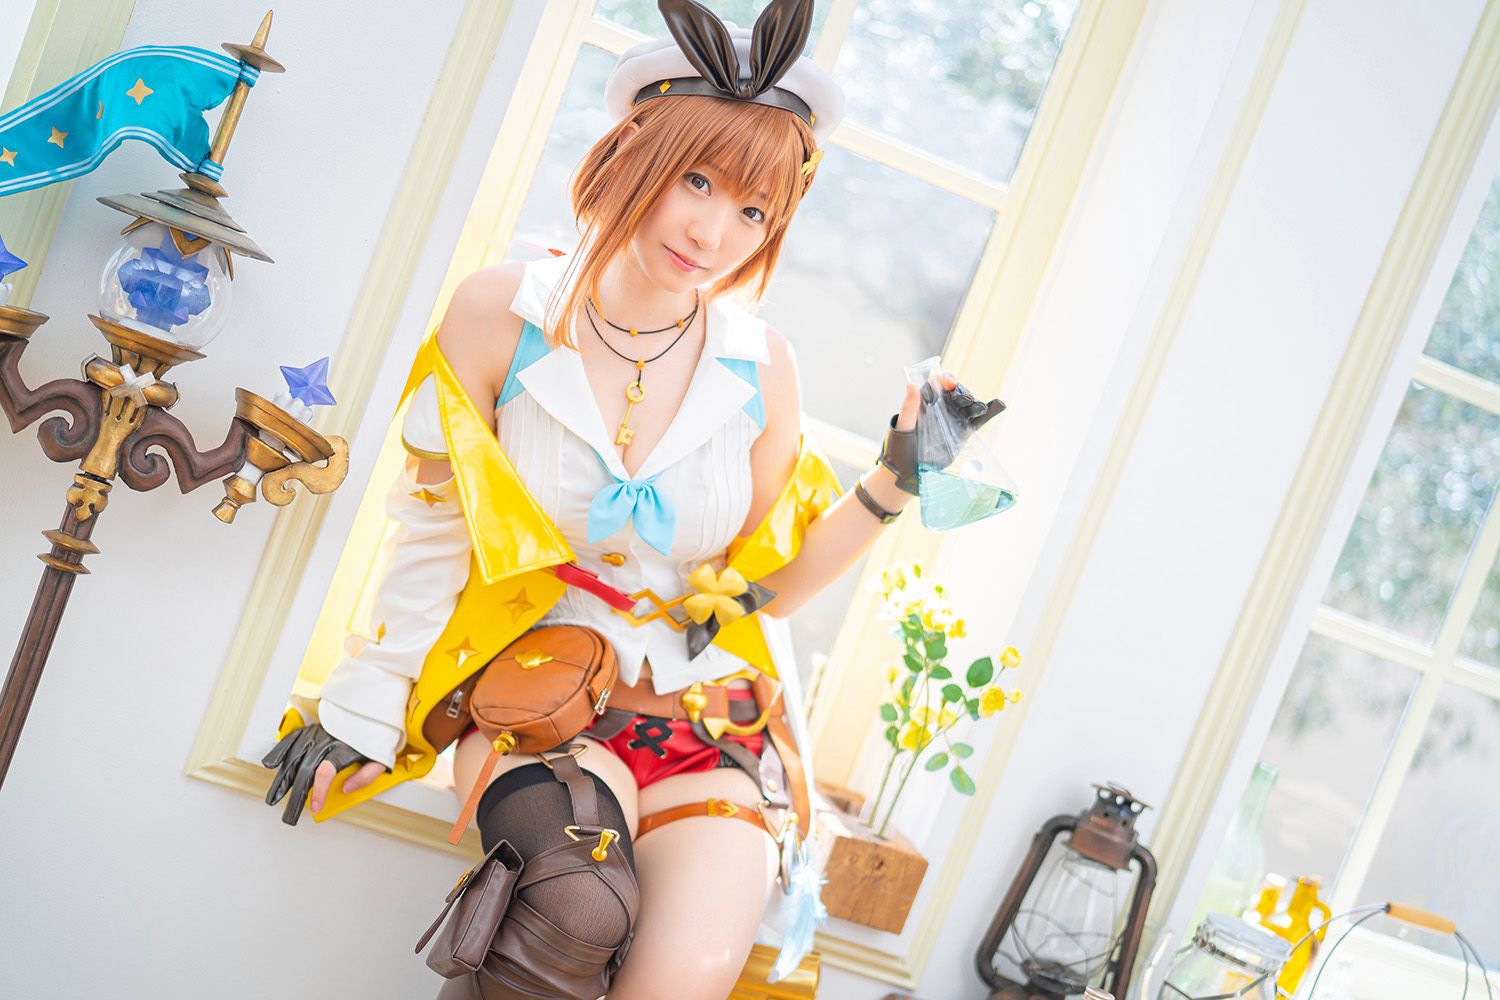 [Liza's Atelier 2] Iori Mo jacks the official site in cosplay that reproduces Liza's thighs! 5